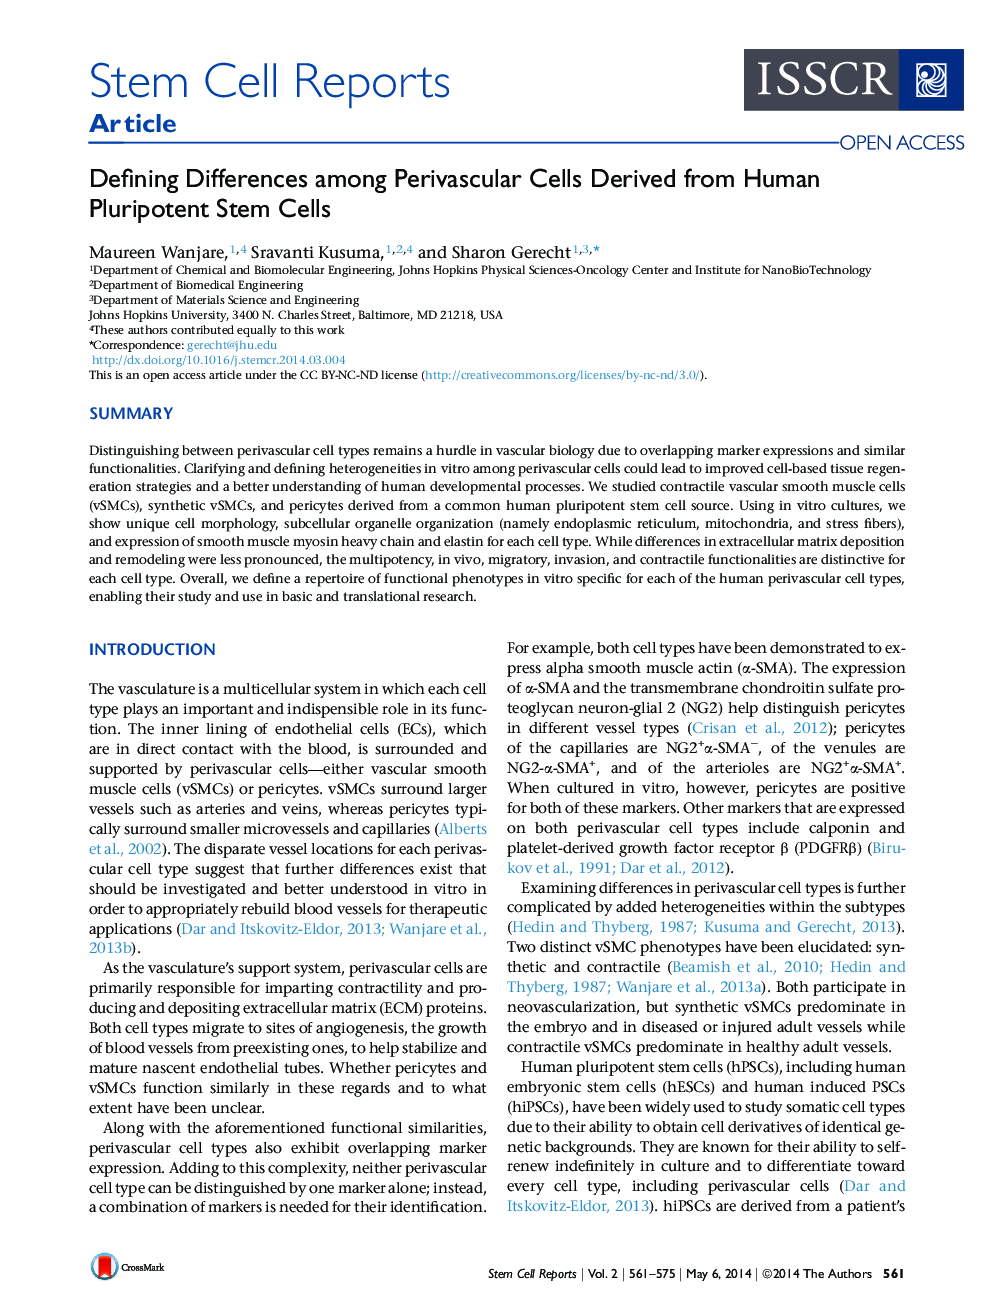 Defining Differences among Perivascular Cells Derived from Human Pluripotent Stem Cells 